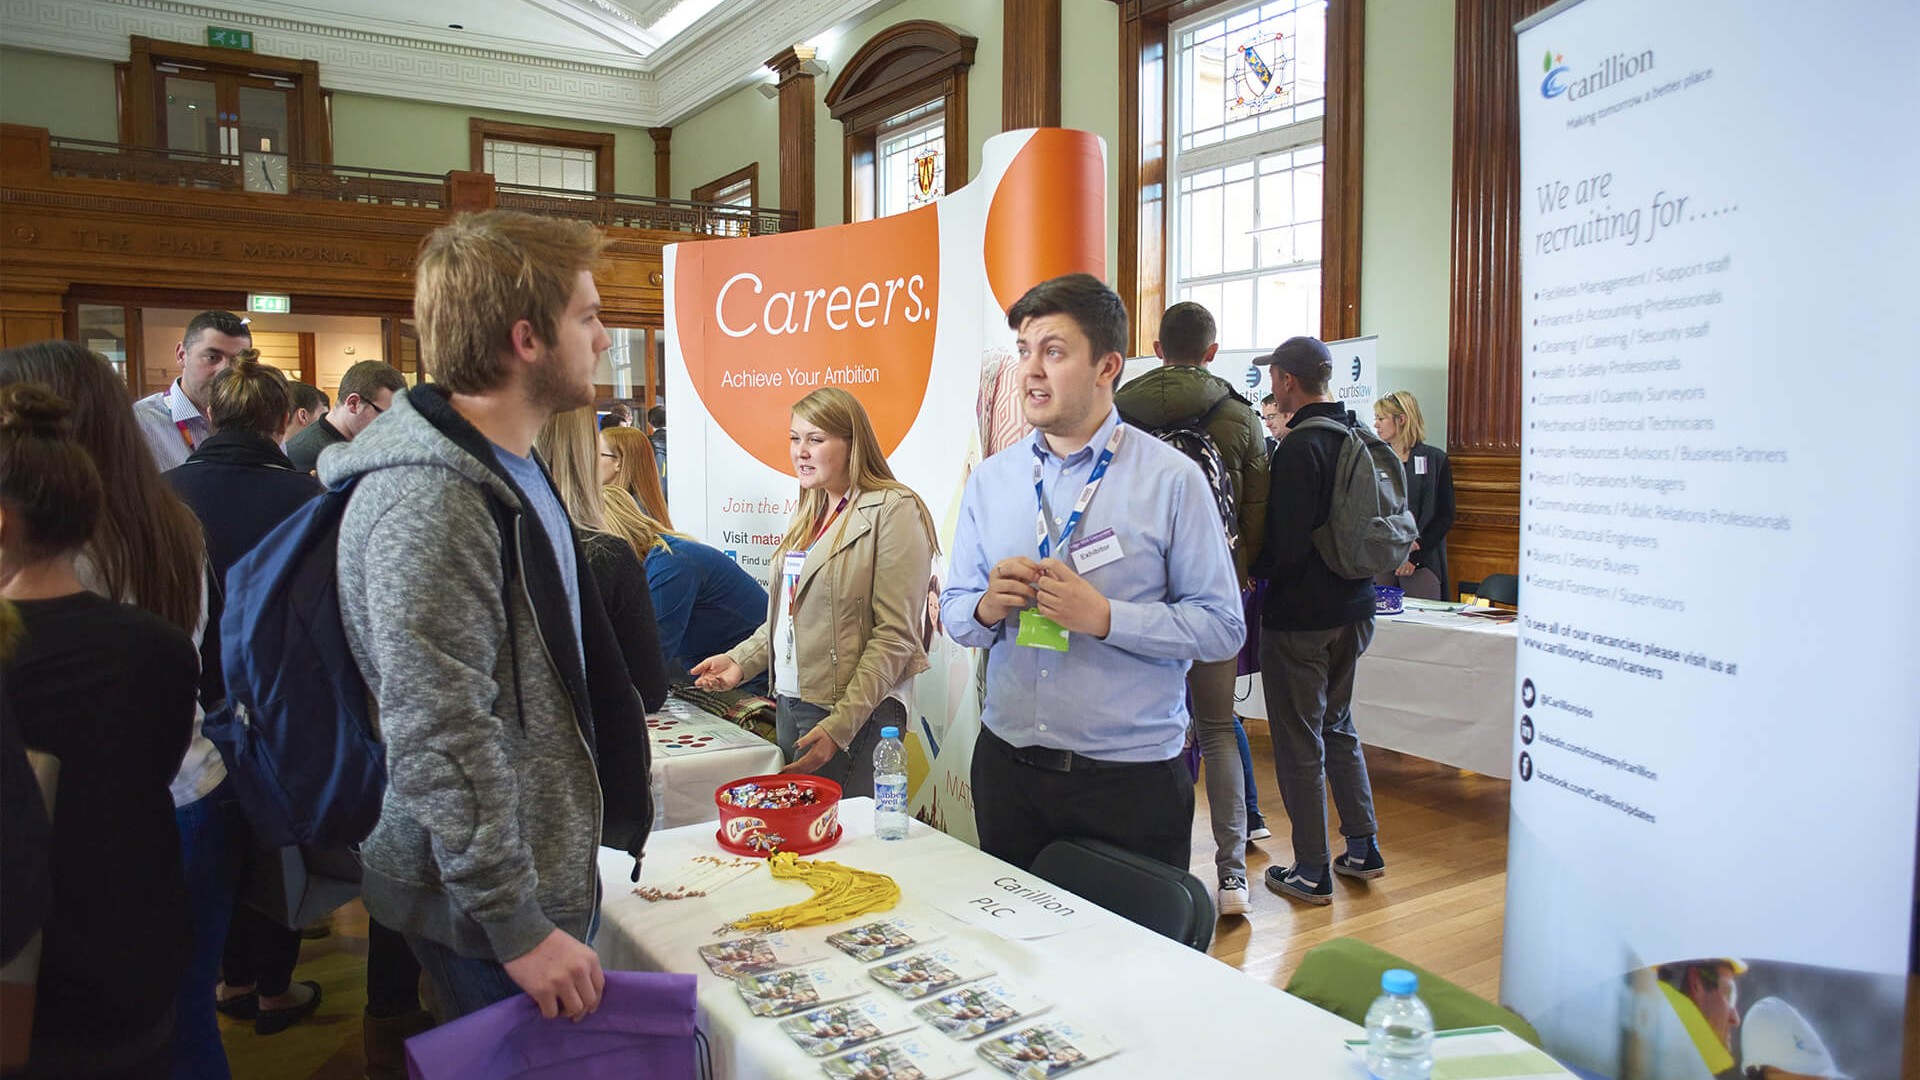 In this there is a Careers fair taking place on the Edge Hill University campus. A student is shown talking to Careers about employability opportunities.